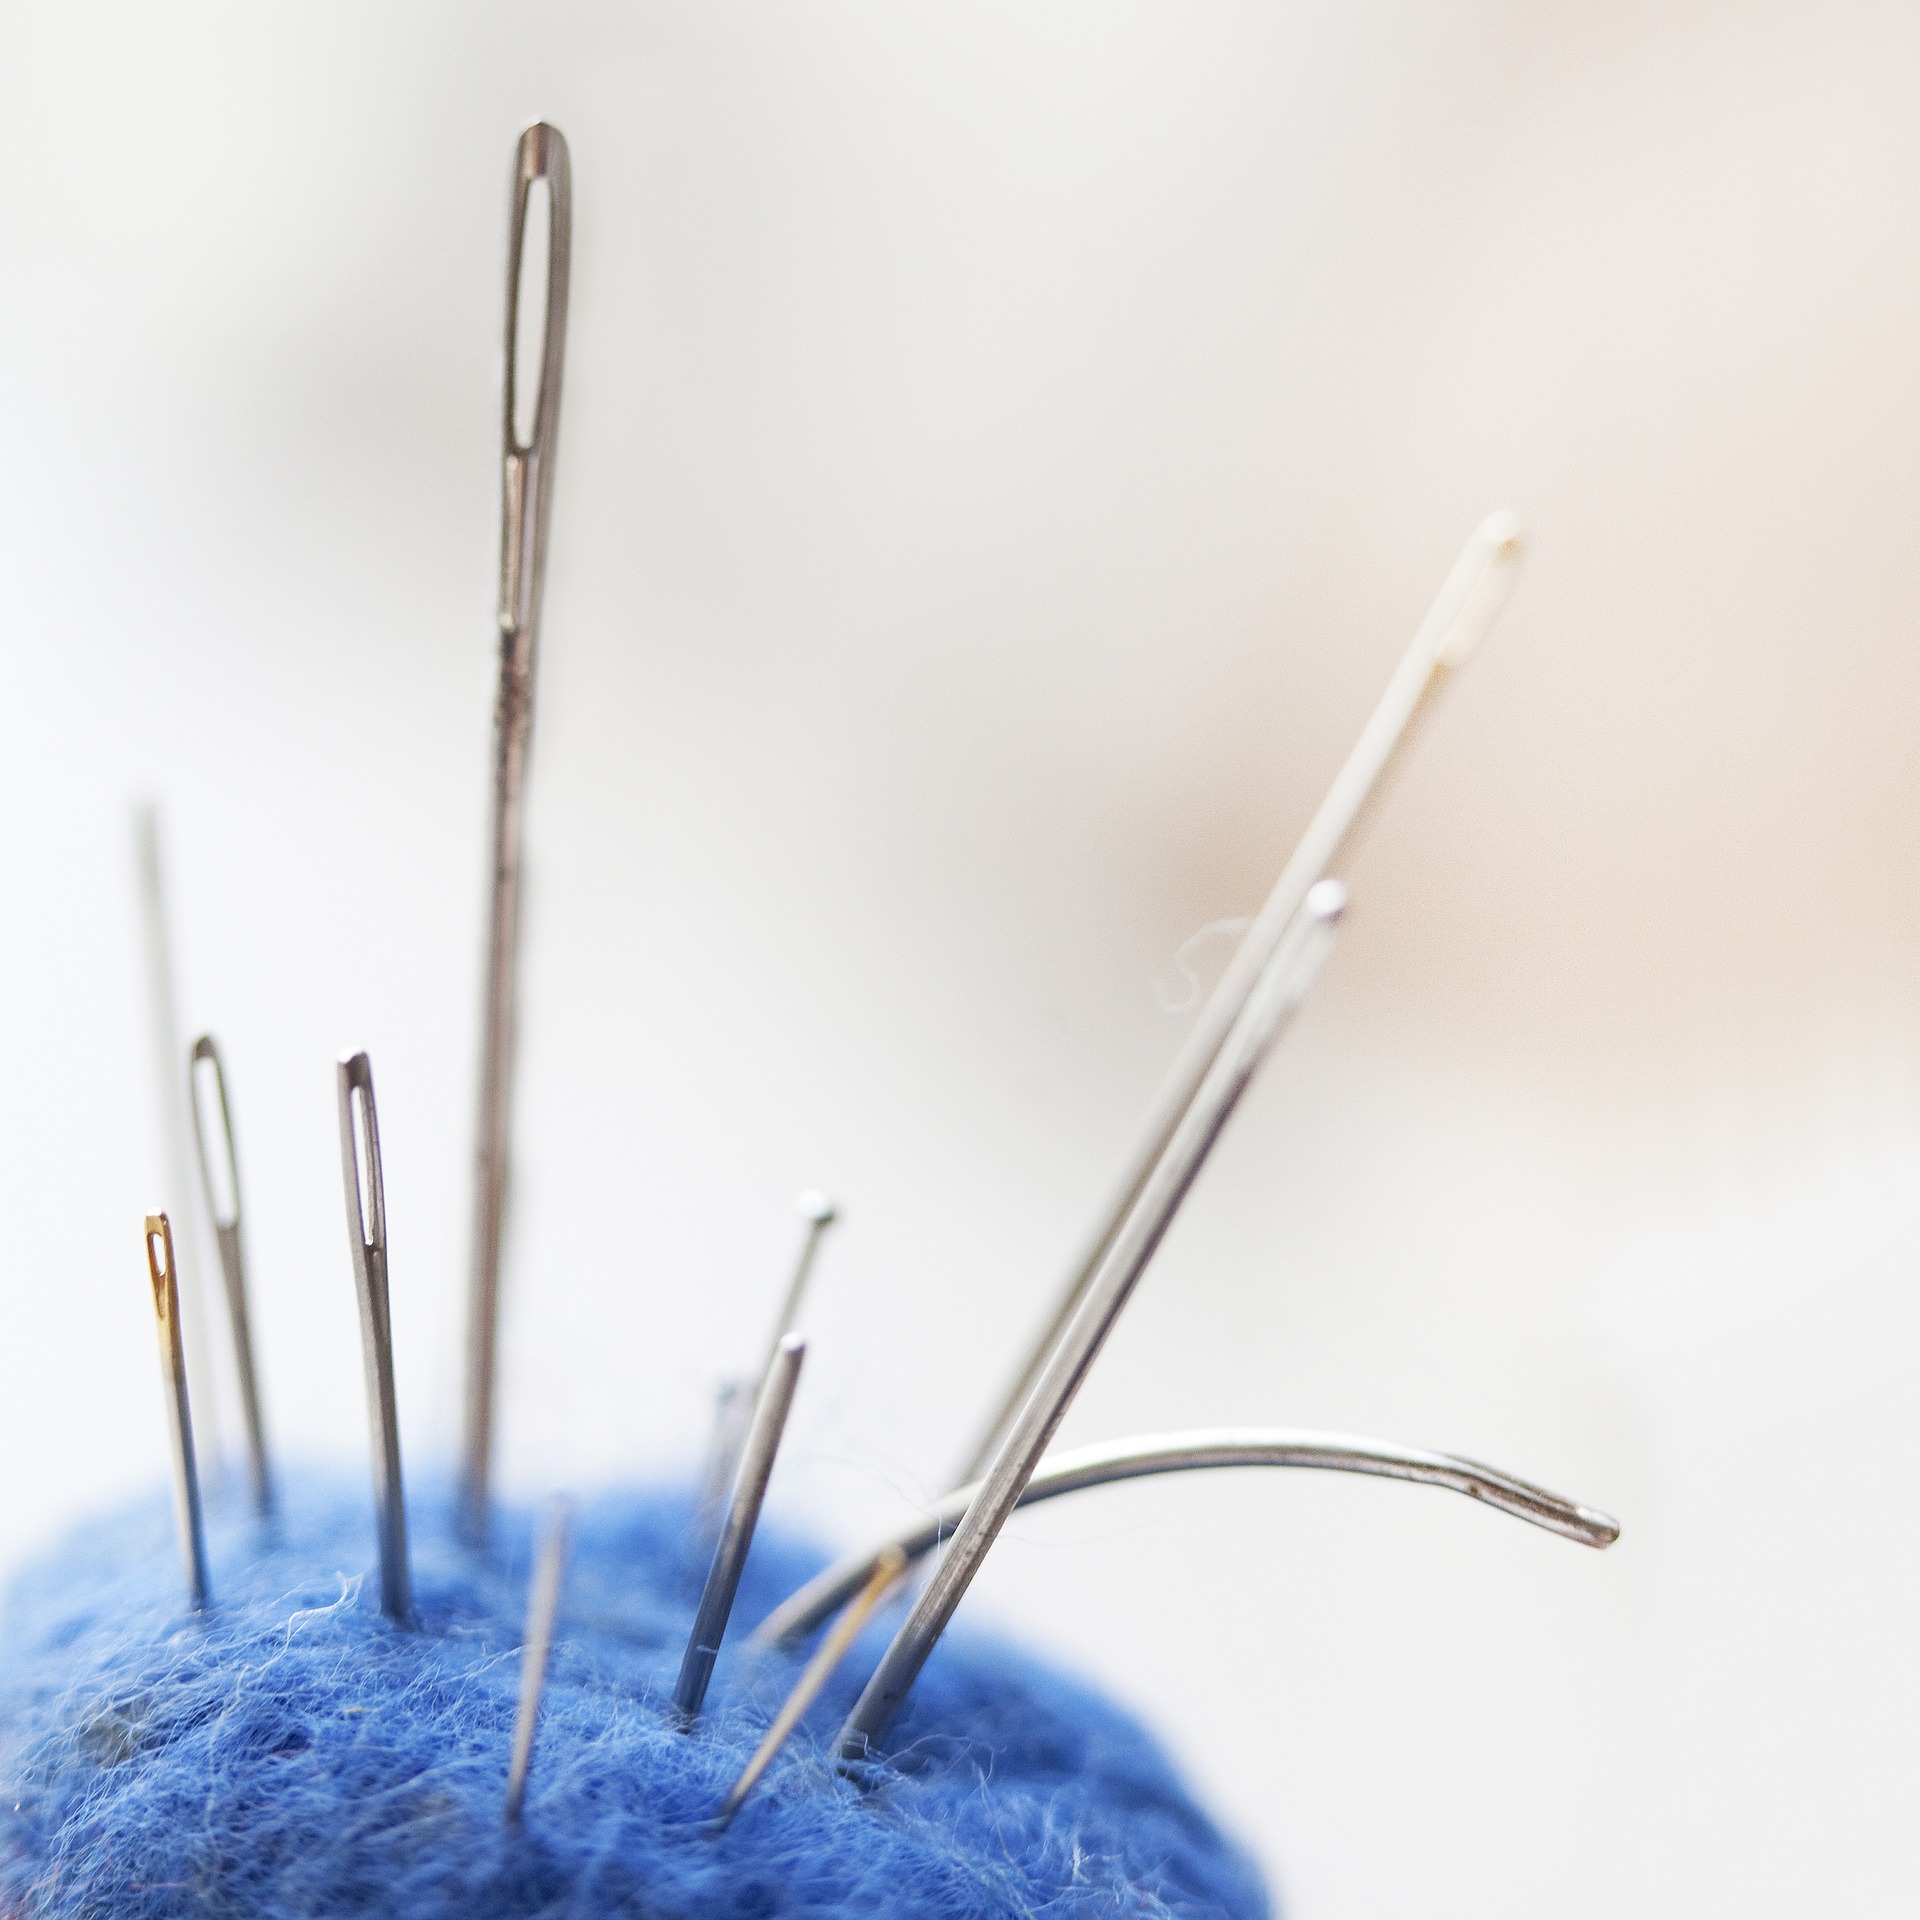 variety of sewing needles sticking out of the top of a blue ball of fuzzy yarn